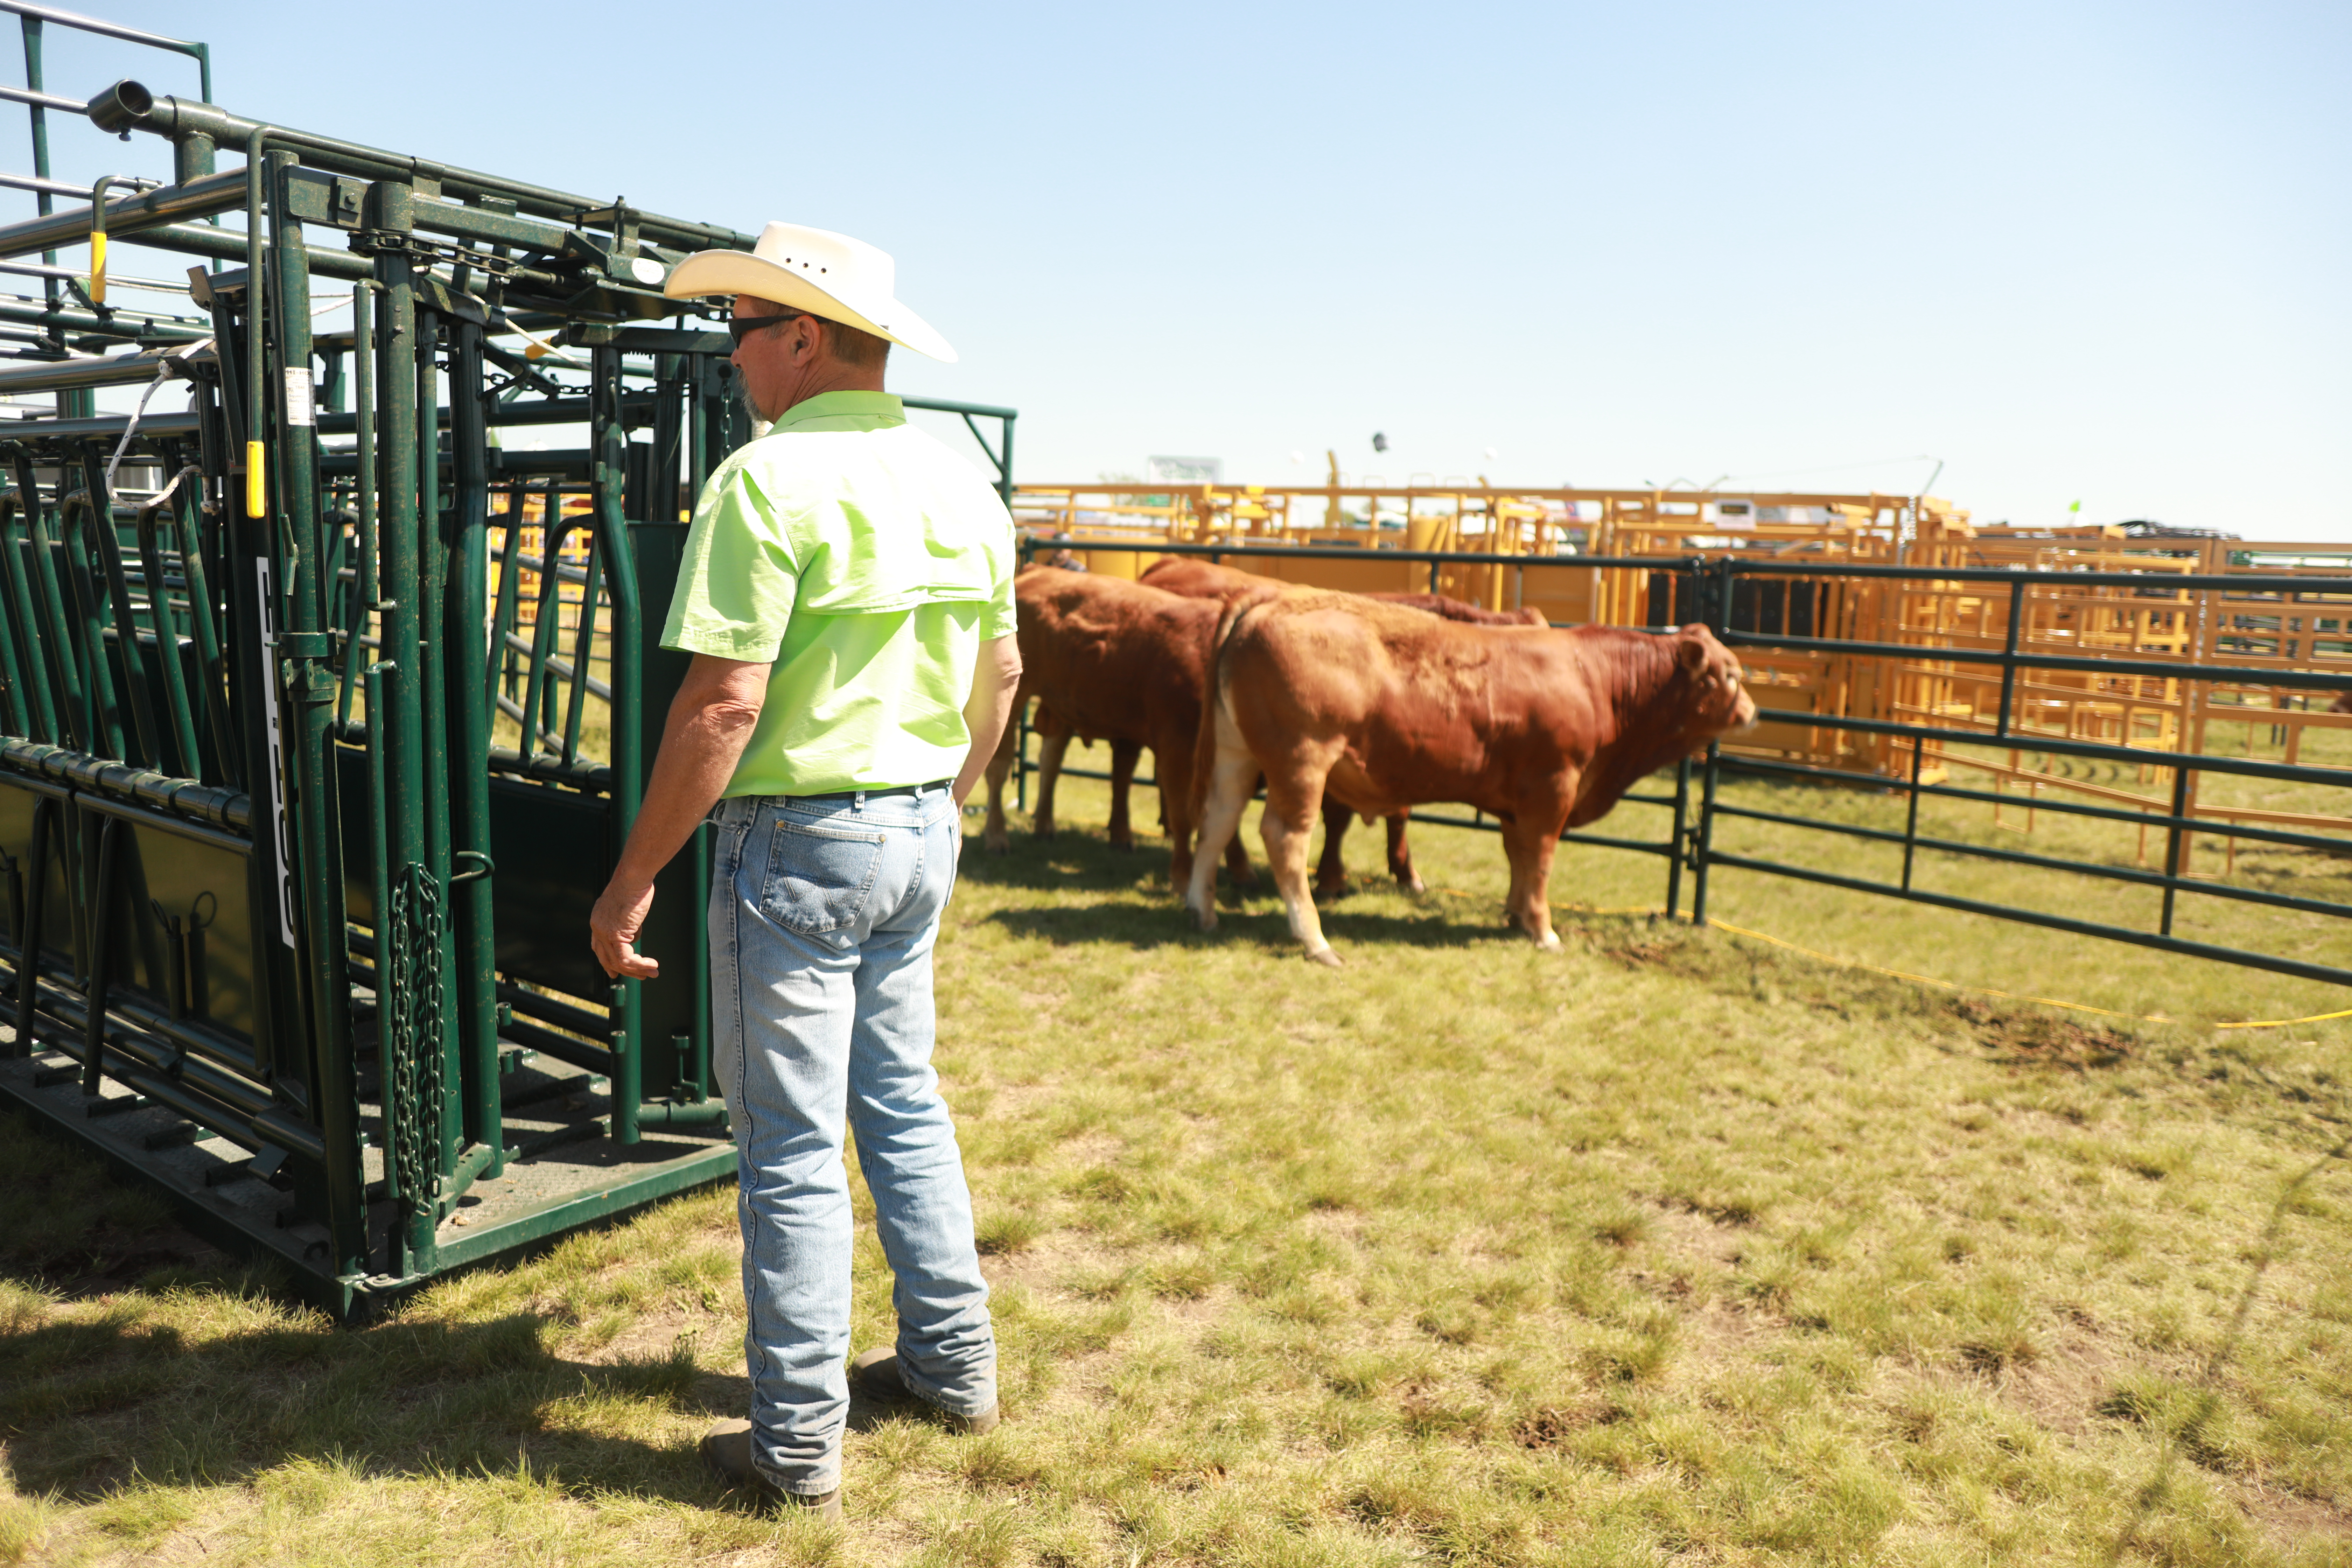 See the Latest Technology in Livestock Equipment Demonstrated Live